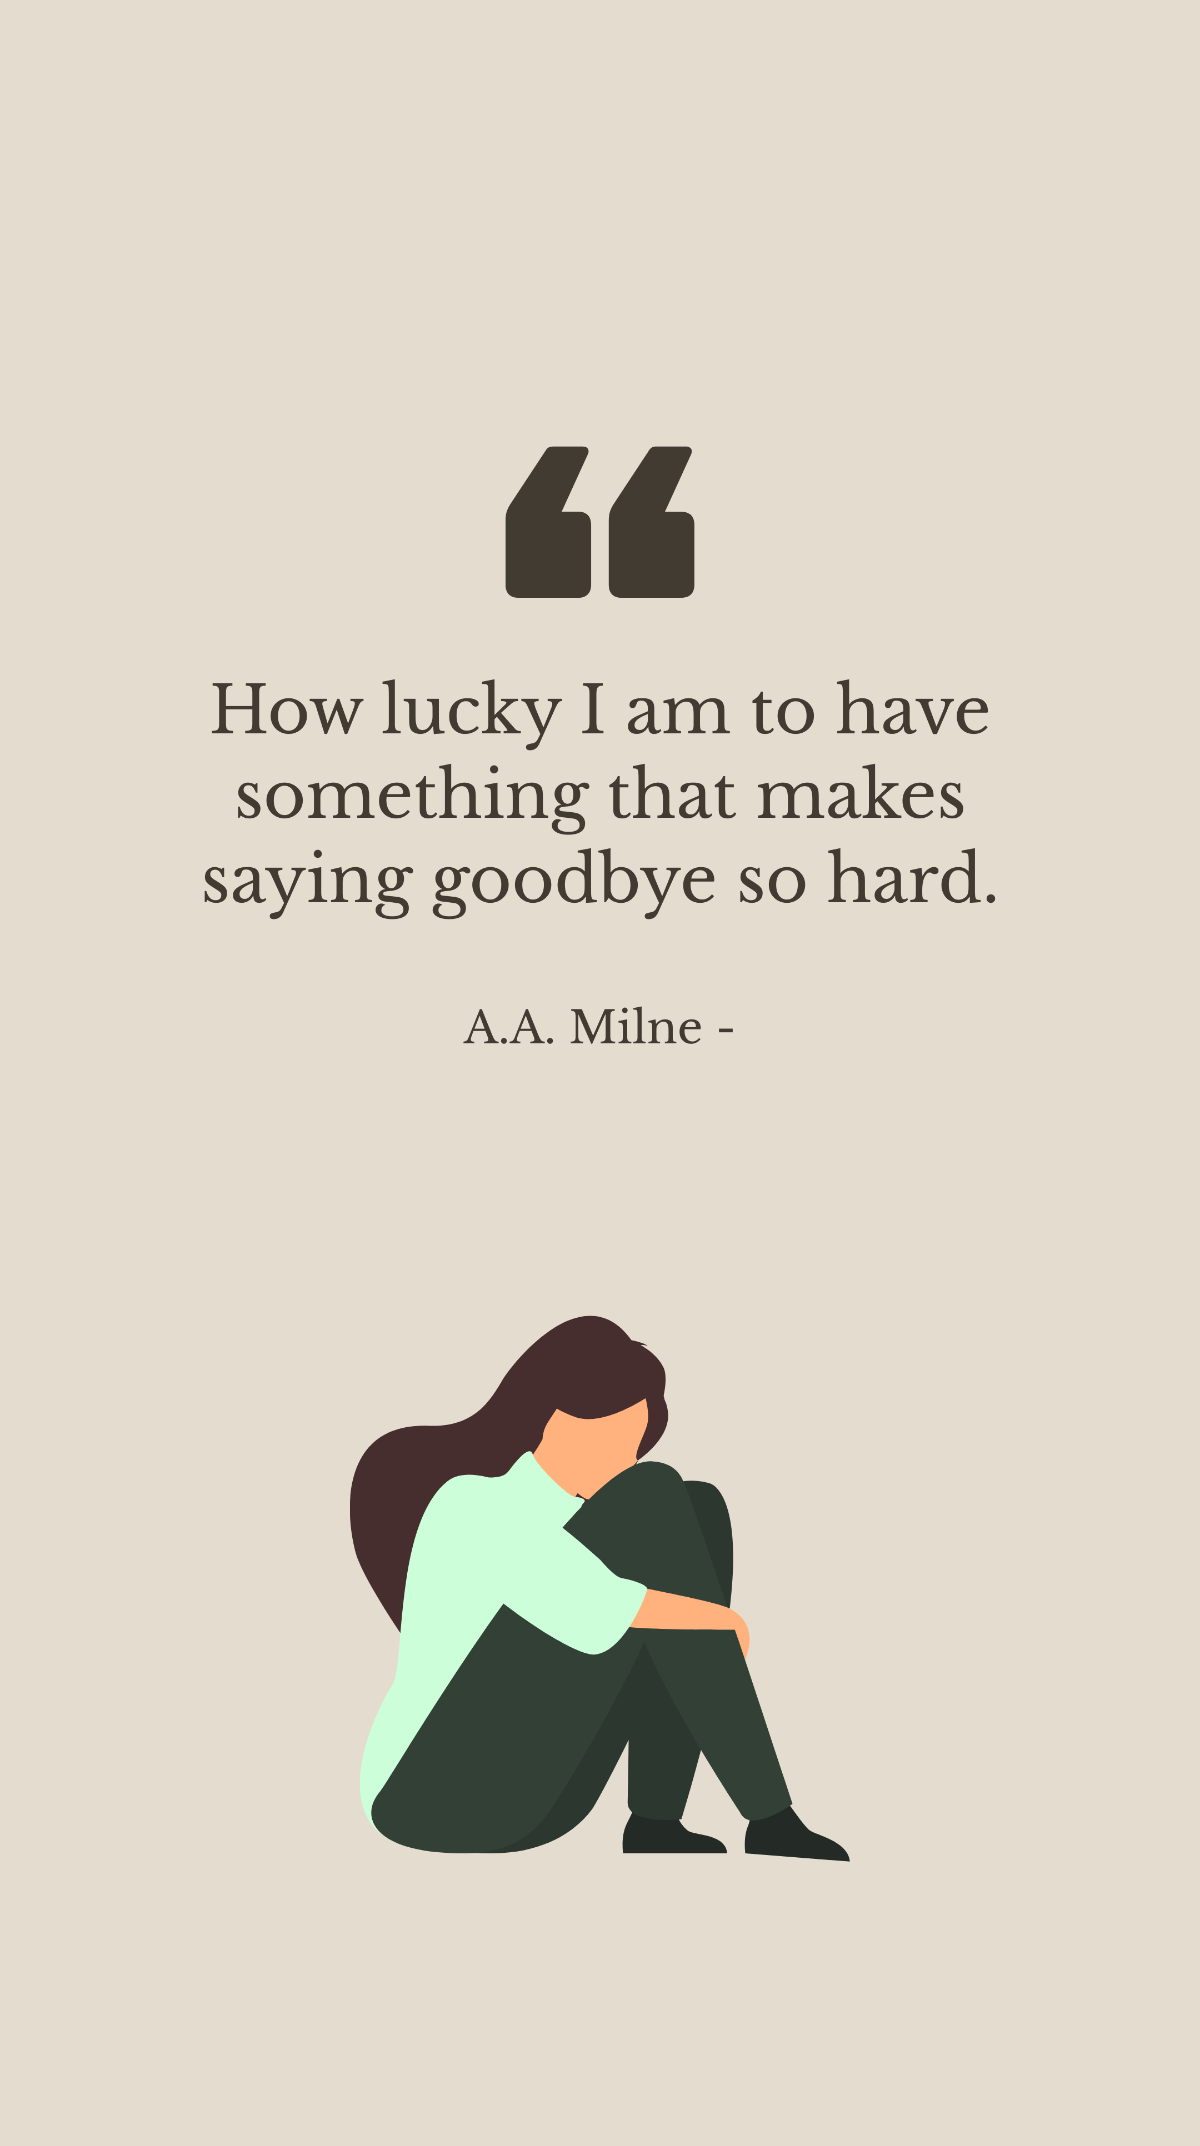 A.A. Milne - How lucky I am to have something that makes saying goodbye so hard. Template